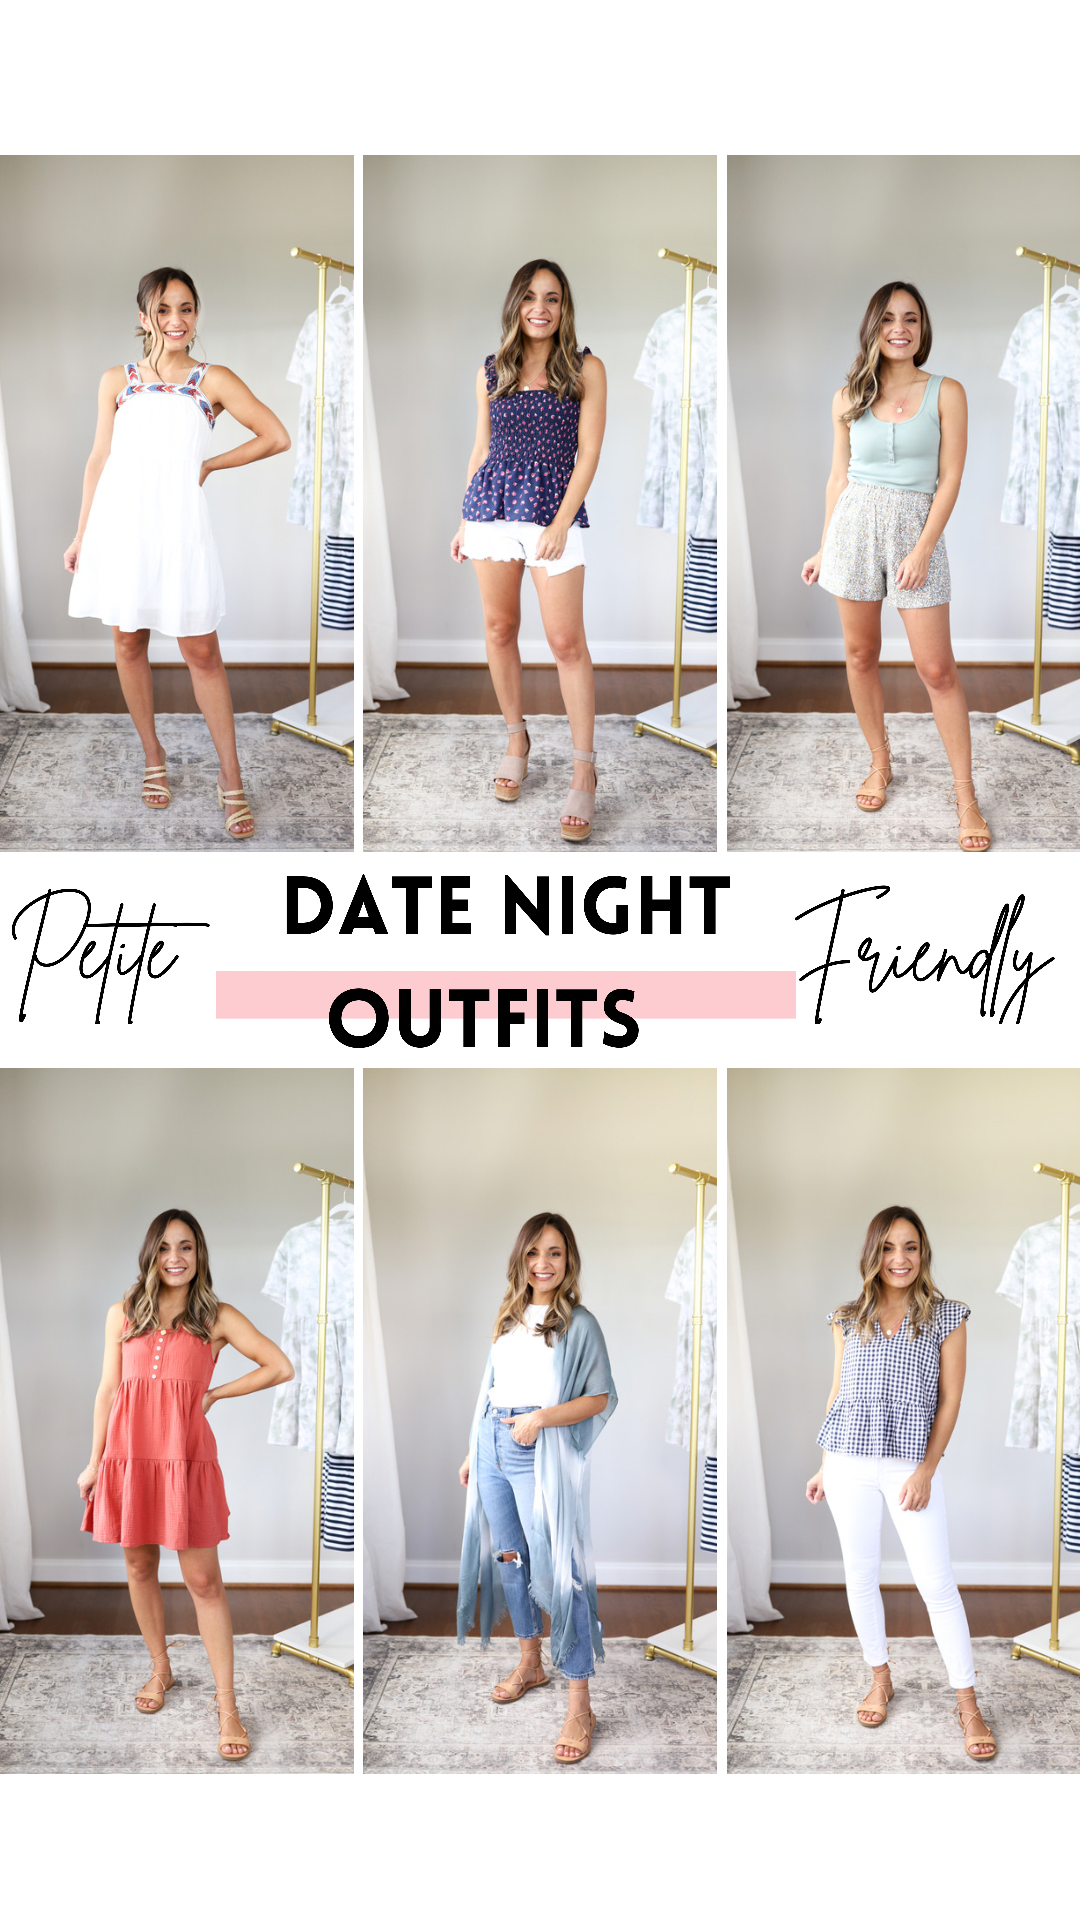 Date Night Outfits by Occasion - Pumps ...